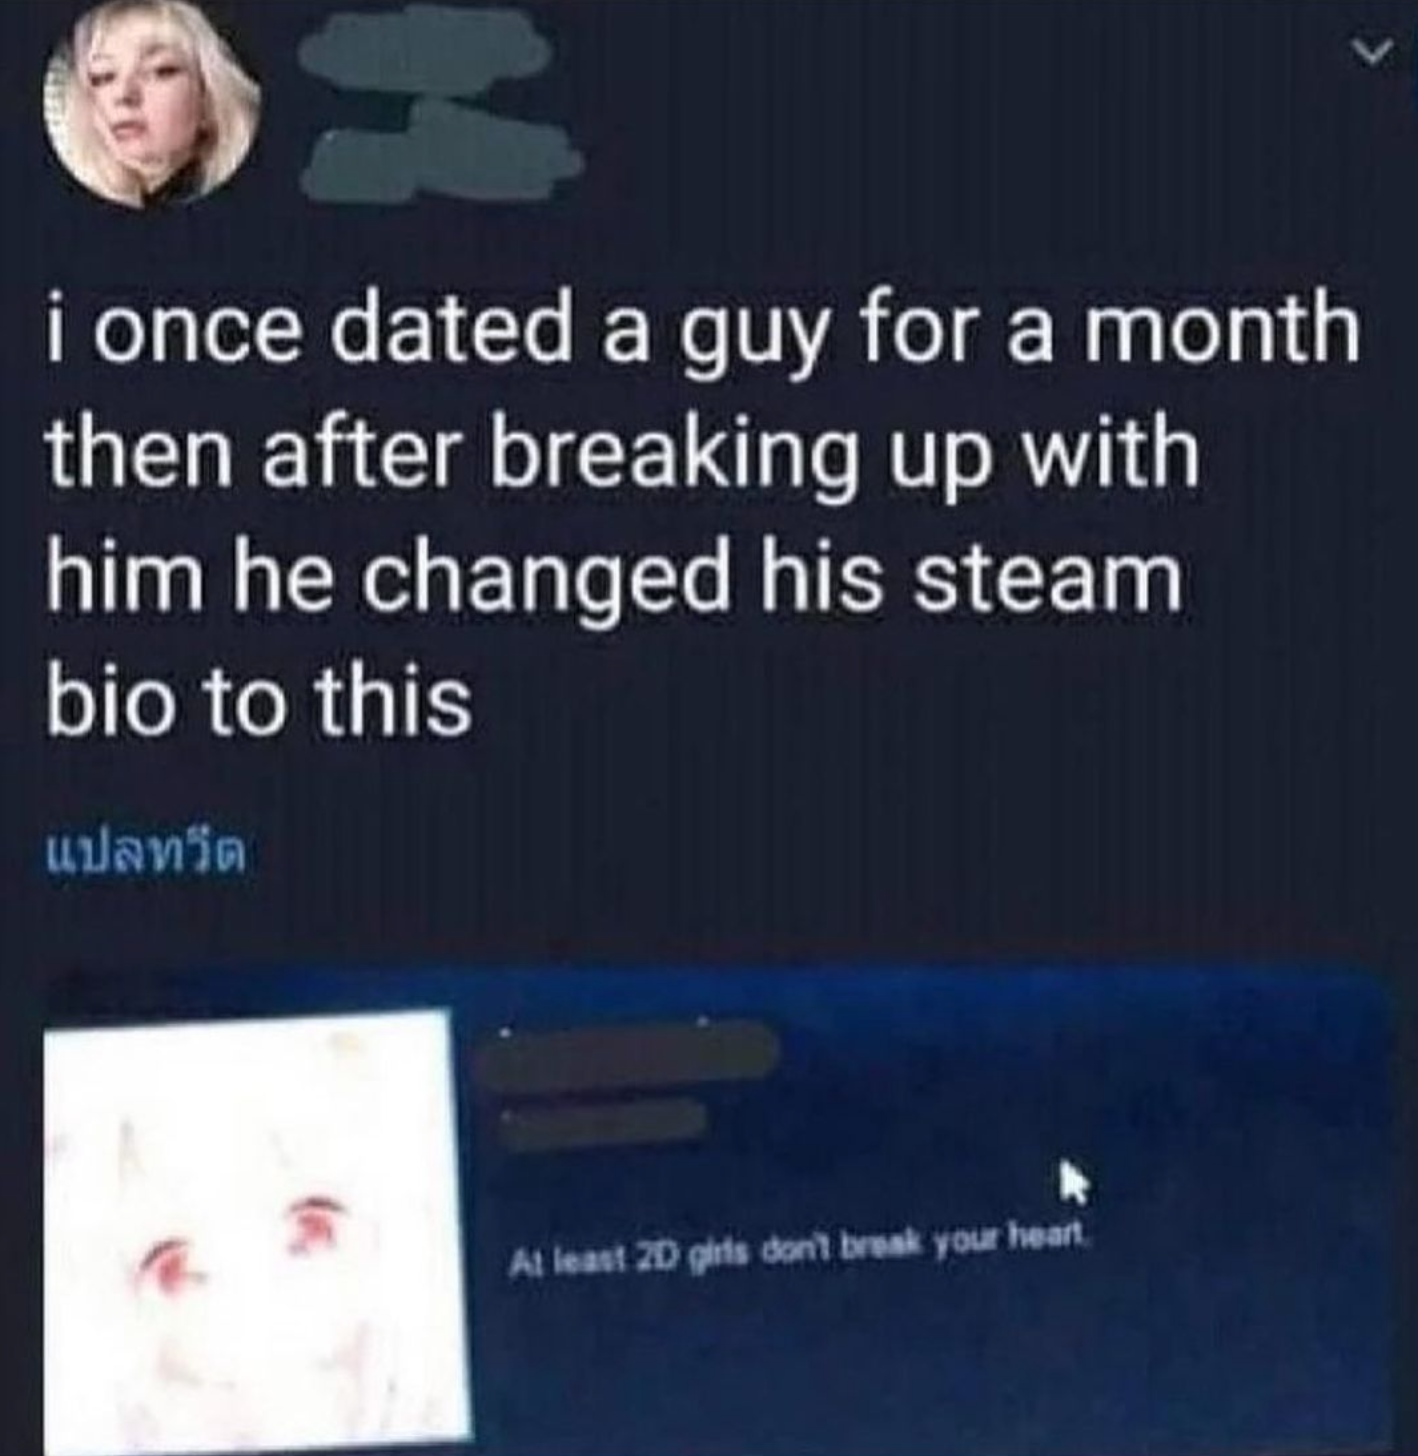 funny gaming memes - presentation - 3 i once dated a guy for a month then after breaking up with him he changed his steam bio to this At least 20 girls don't break your heart